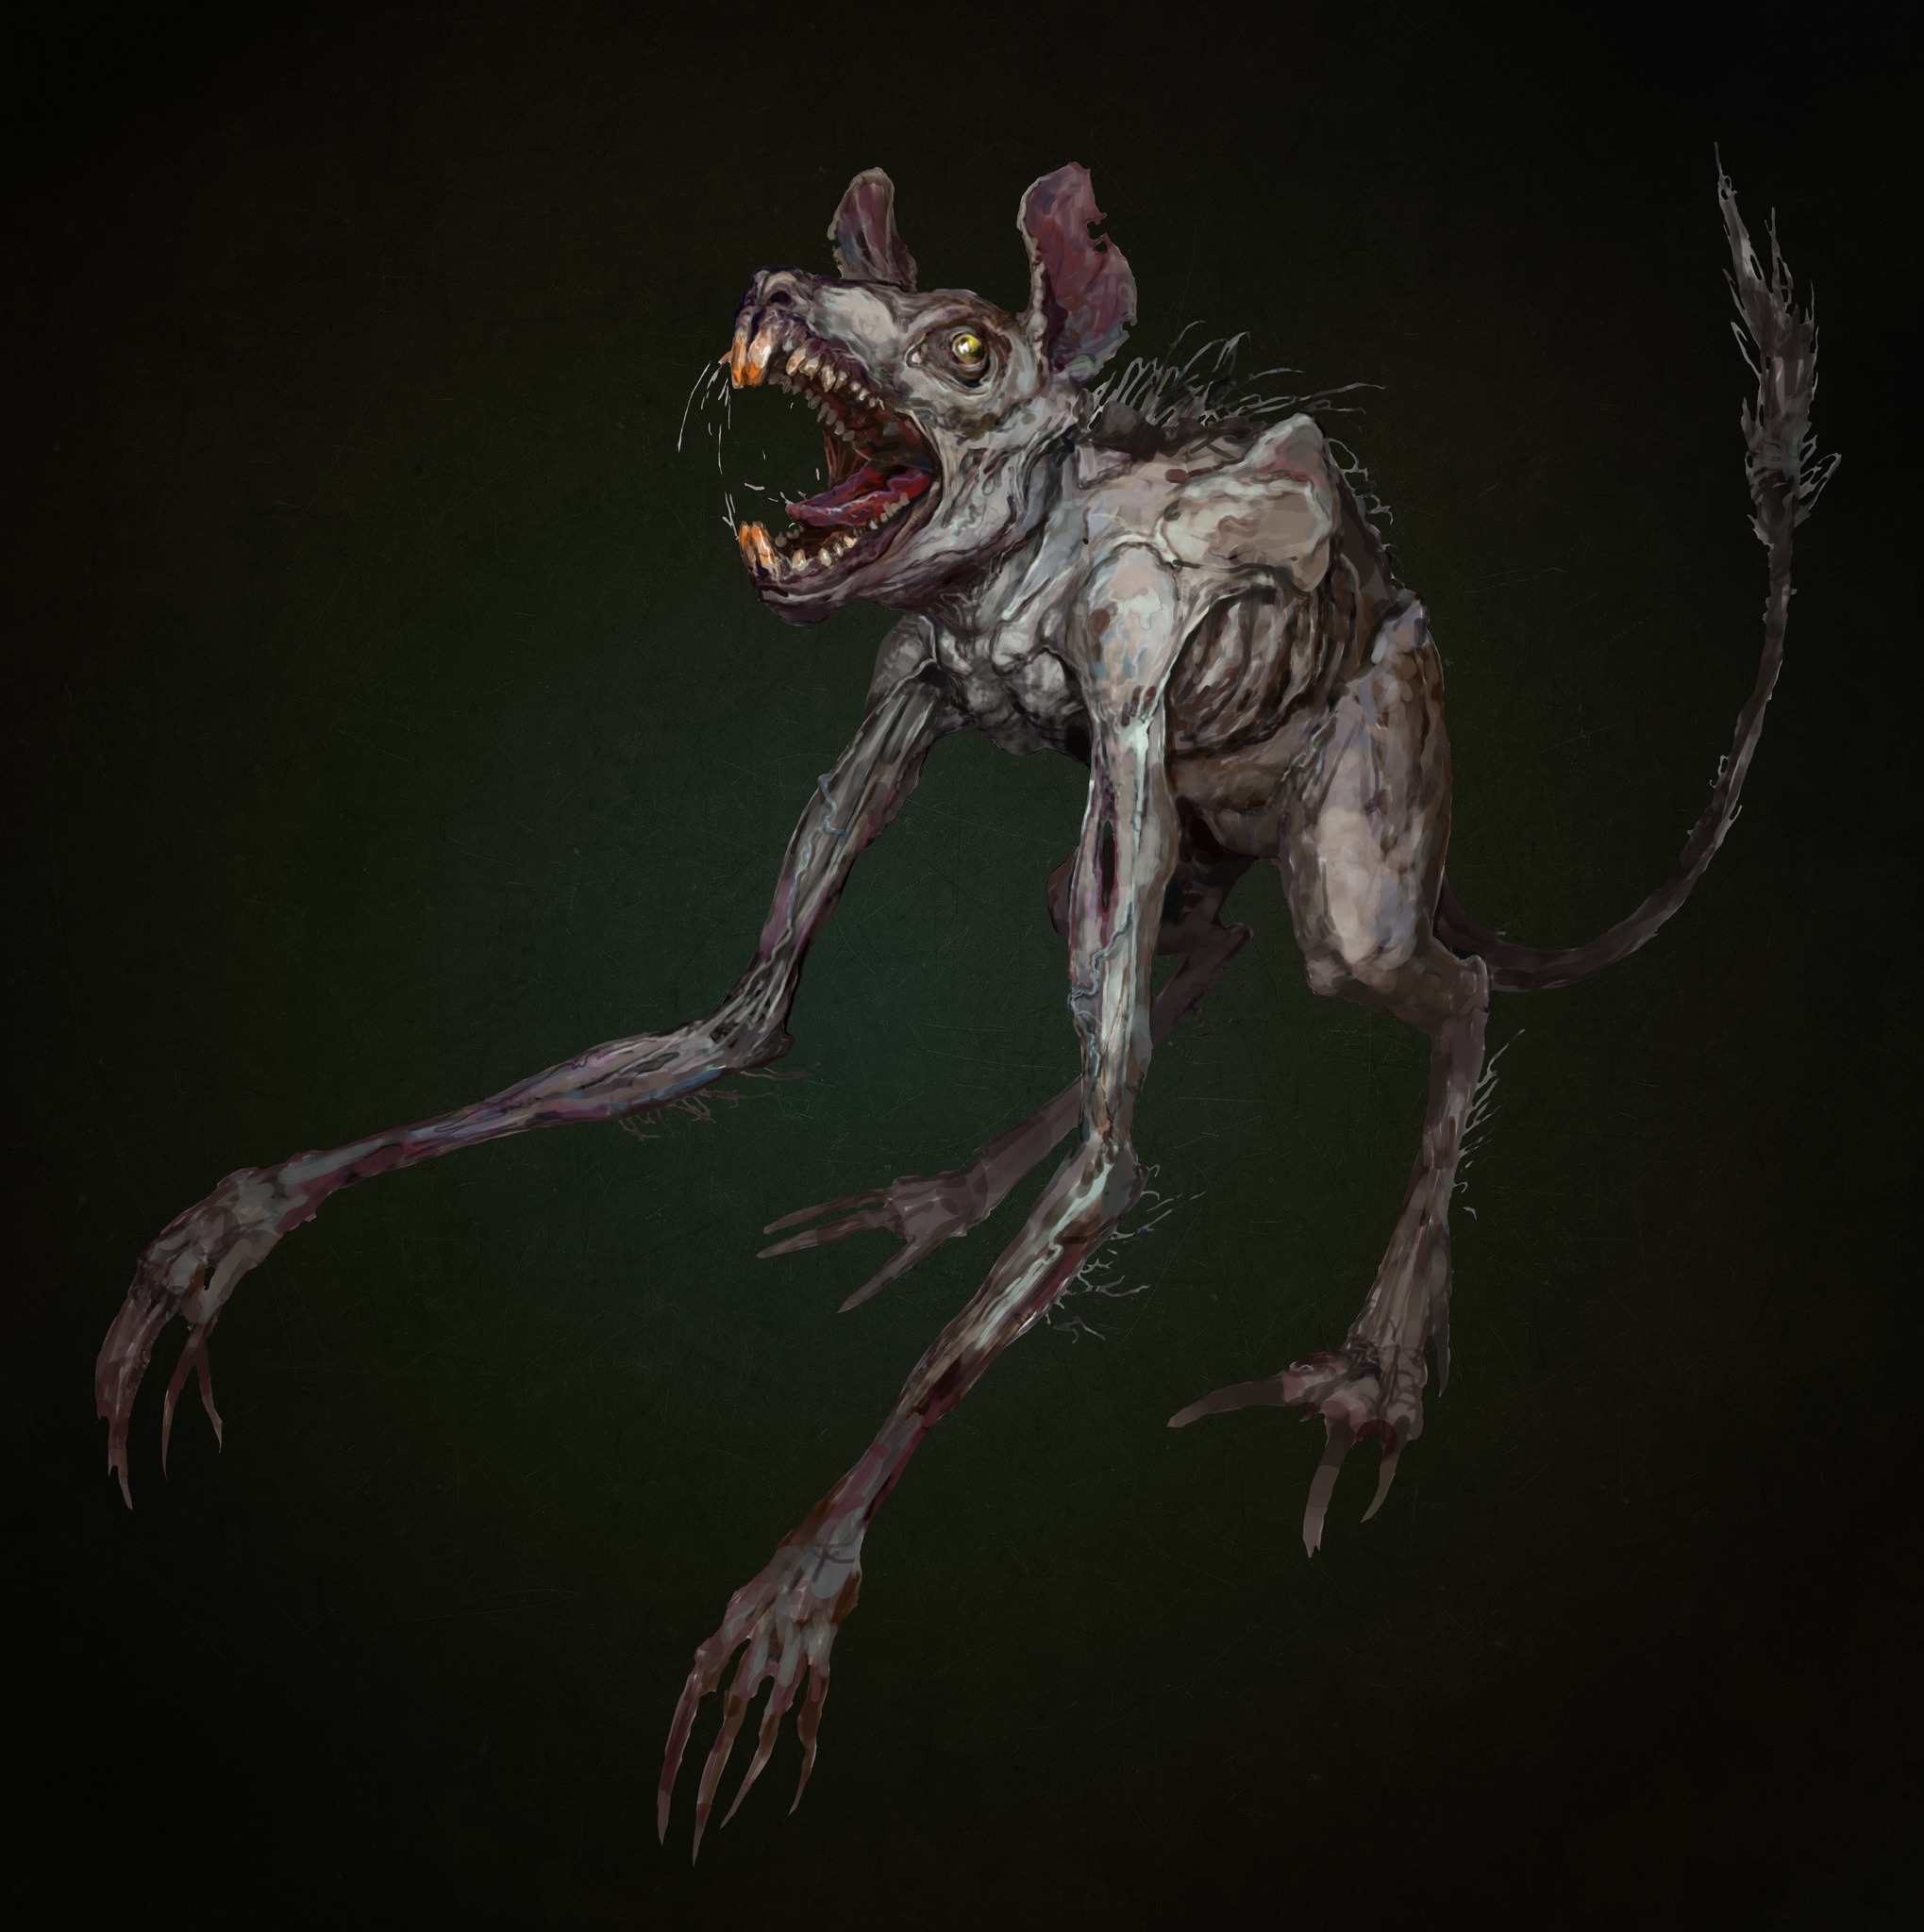 Developers from GSC Game World showed a stewed mutant from the game STALKER 2: Heart of Chornobyl